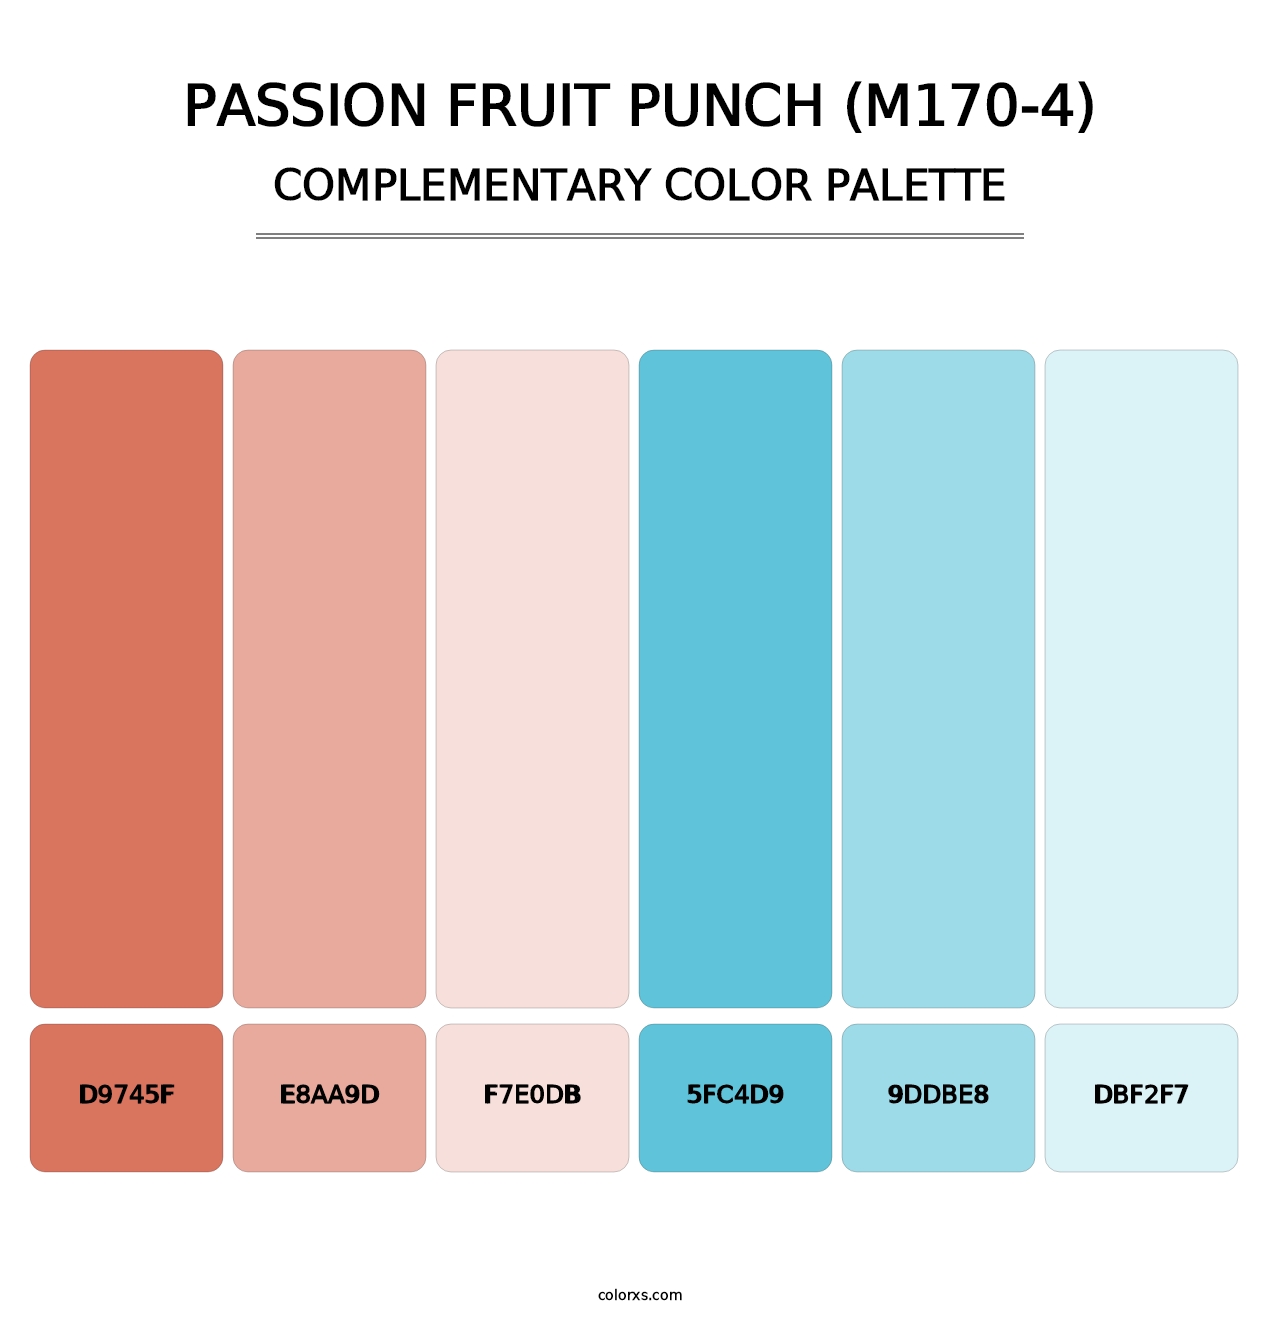 Passion Fruit Punch (M170-4) - Complementary Color Palette